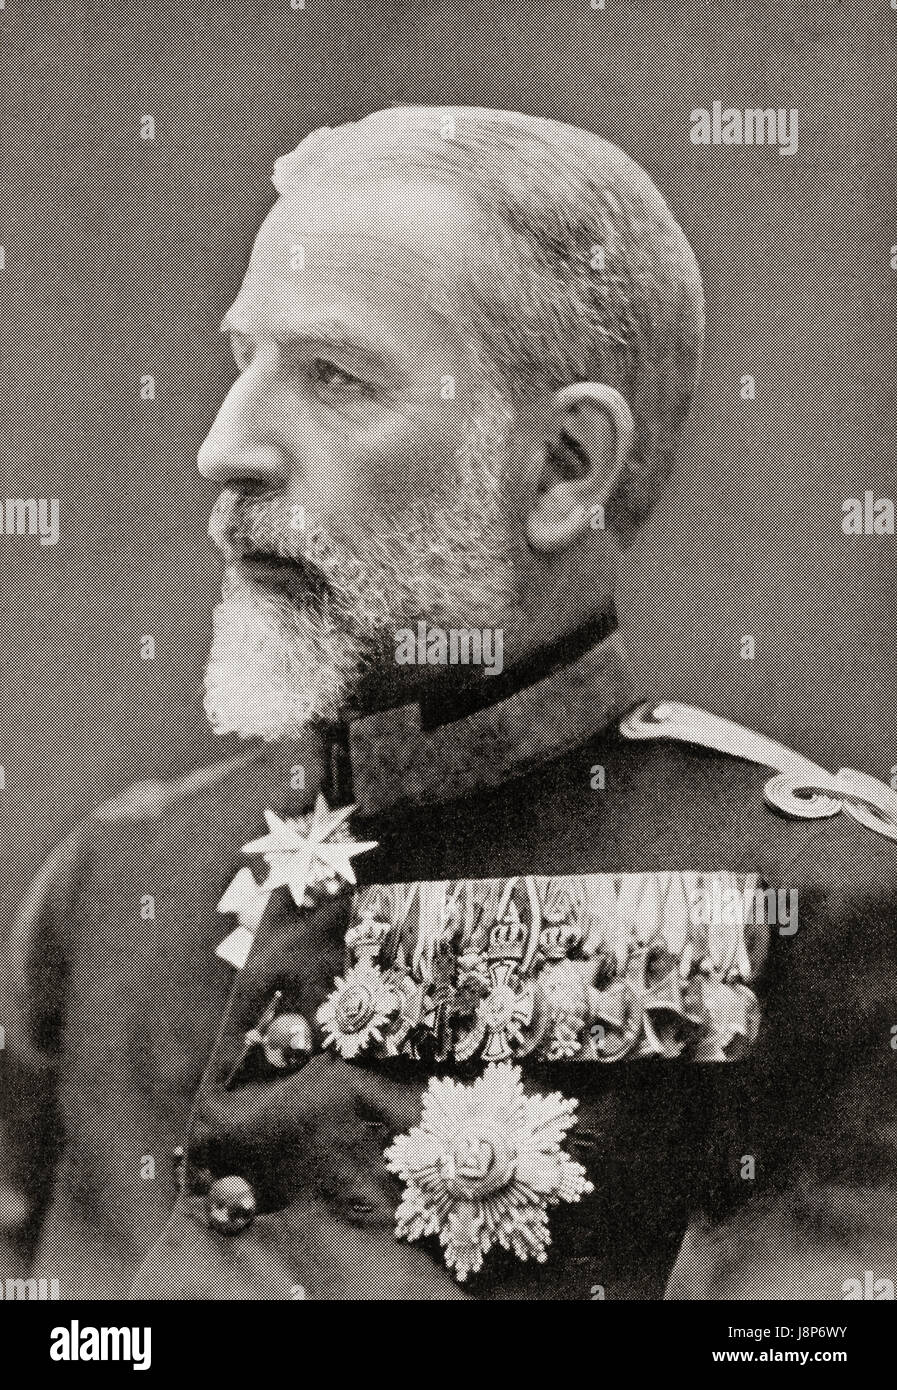 Carol I, 1839 – 1914, born Prince Karl of Hohenzollern-Sigmaringen.  Ruler of Romania.  From Hutchinson's History of the Nations, published 1915. Stock Photo